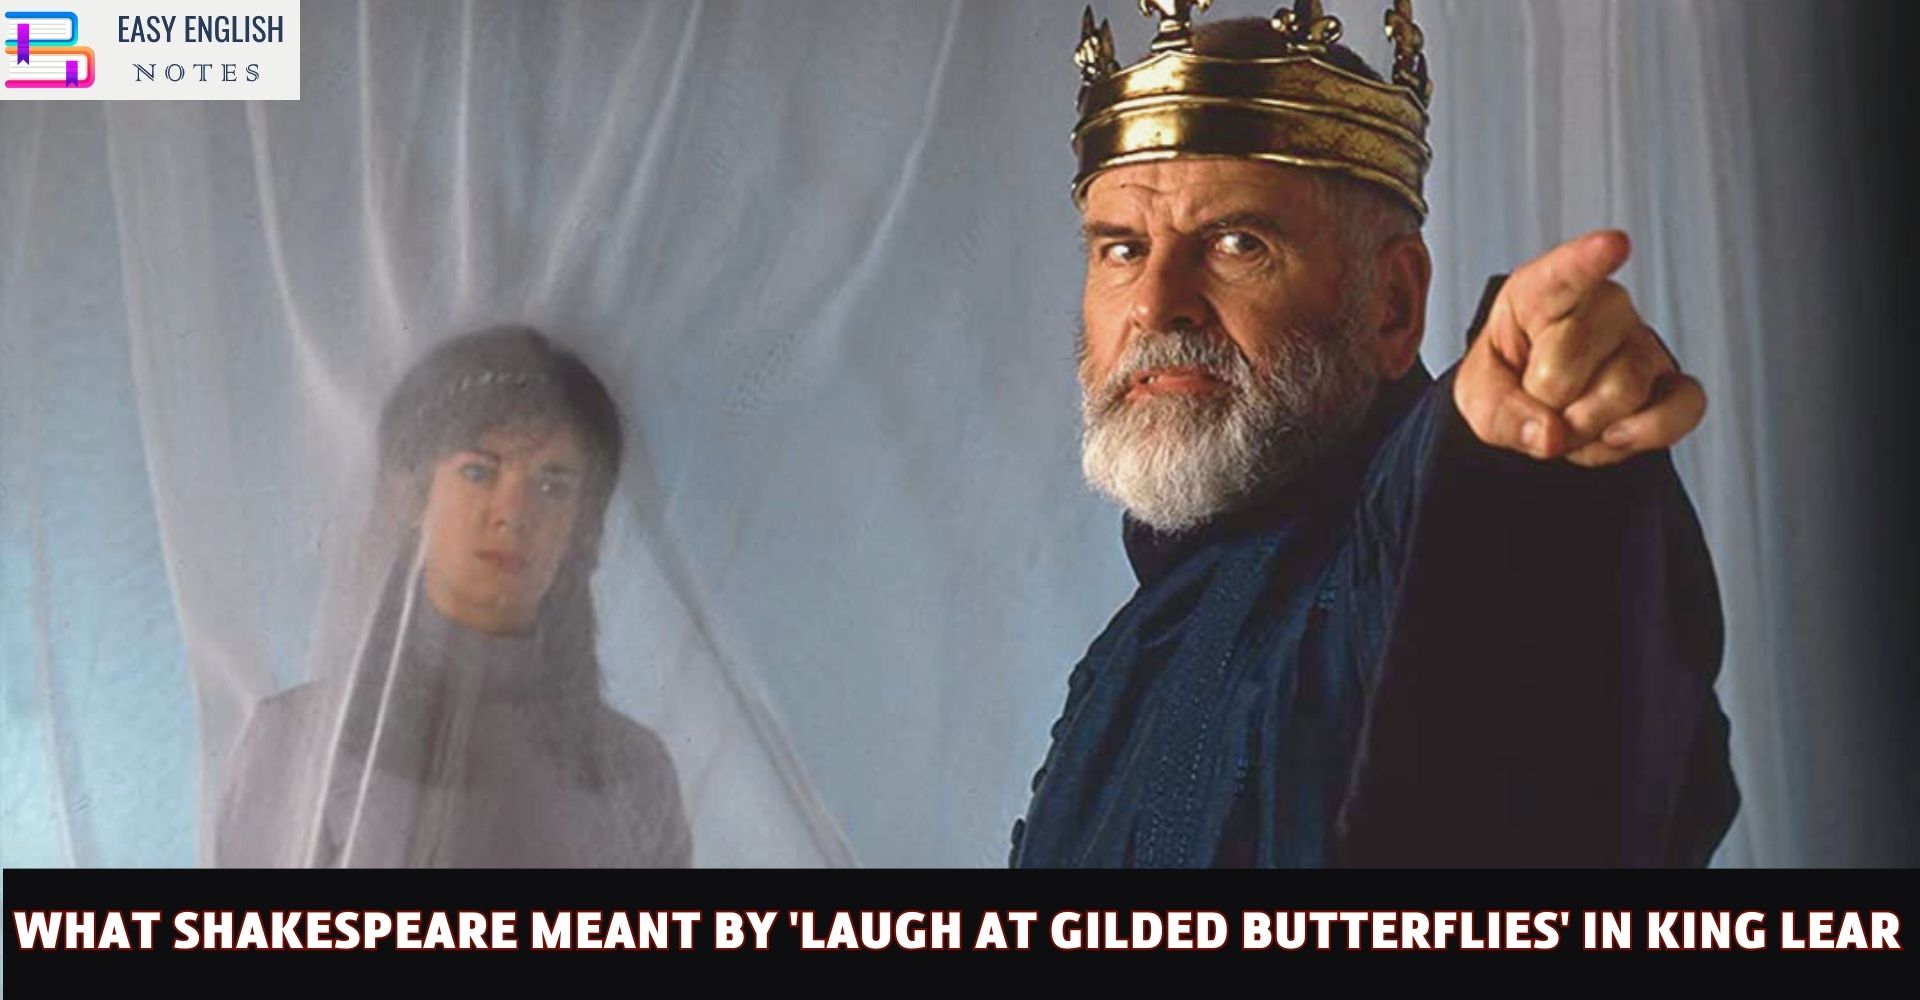 What Shakespeare Meant by 'Laugh at Gilded Butterflies' in King Lear